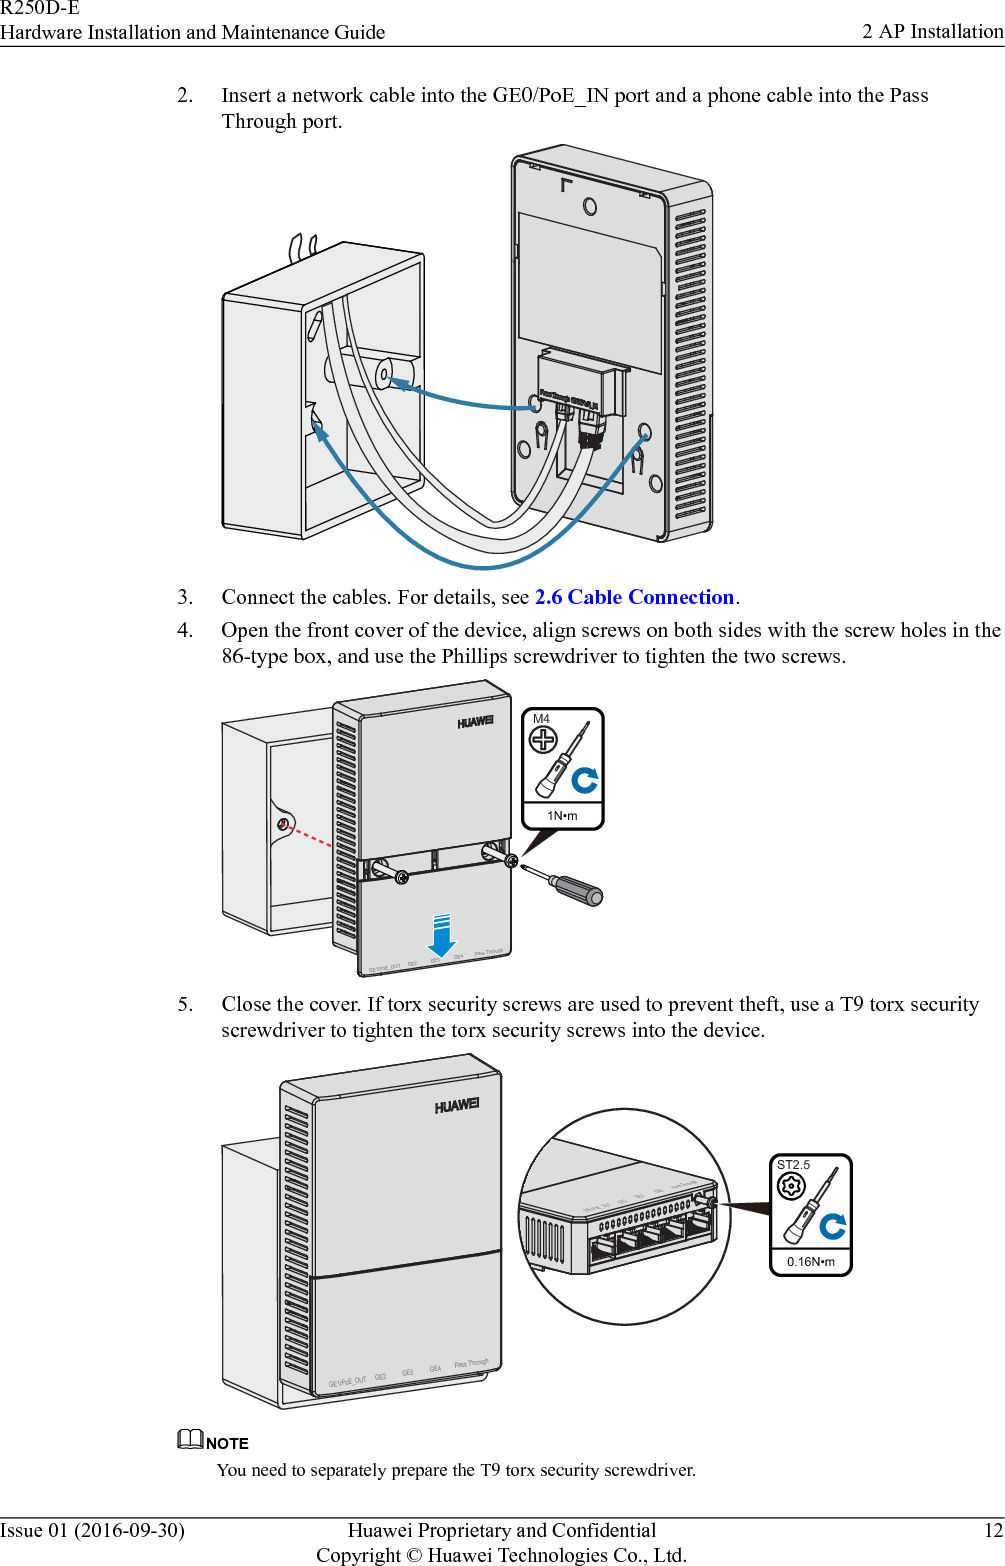 2. Insert a network cable into the GE0/PoE_IN port and a phone cable into the PassThrough port.GE1/PoE_OUTPass Through3. Connect the cables. For details, see 2.6 Cable Connection.4. Open the front cover of the device, align screws on both sides with the screw holes in the86-type box, and use the Phillips screwdriver to tighten the two screws. 1N•mM4GE1/PoE_OUT GE2 GE3 Pass ThroughGE45. Close the cover. If torx security screws are used to prevent theft, use a T9 torx securityscrewdriver to tighten the torx security screws into the device.GE1/PoE_OUT GE2 GE3 Pass ThroughGE40.16N•mST2.5GE1/PoE_OUTGE2 GE3 Pass ThroughGE4NOTEYou need to separately prepare the T9 torx security screwdriver.R250D-EHardware Installation and Maintenance Guide 2 AP InstallationIssue 01 (2016-09-30) Huawei Proprietary and ConfidentialCopyright © Huawei Technologies Co., Ltd.12